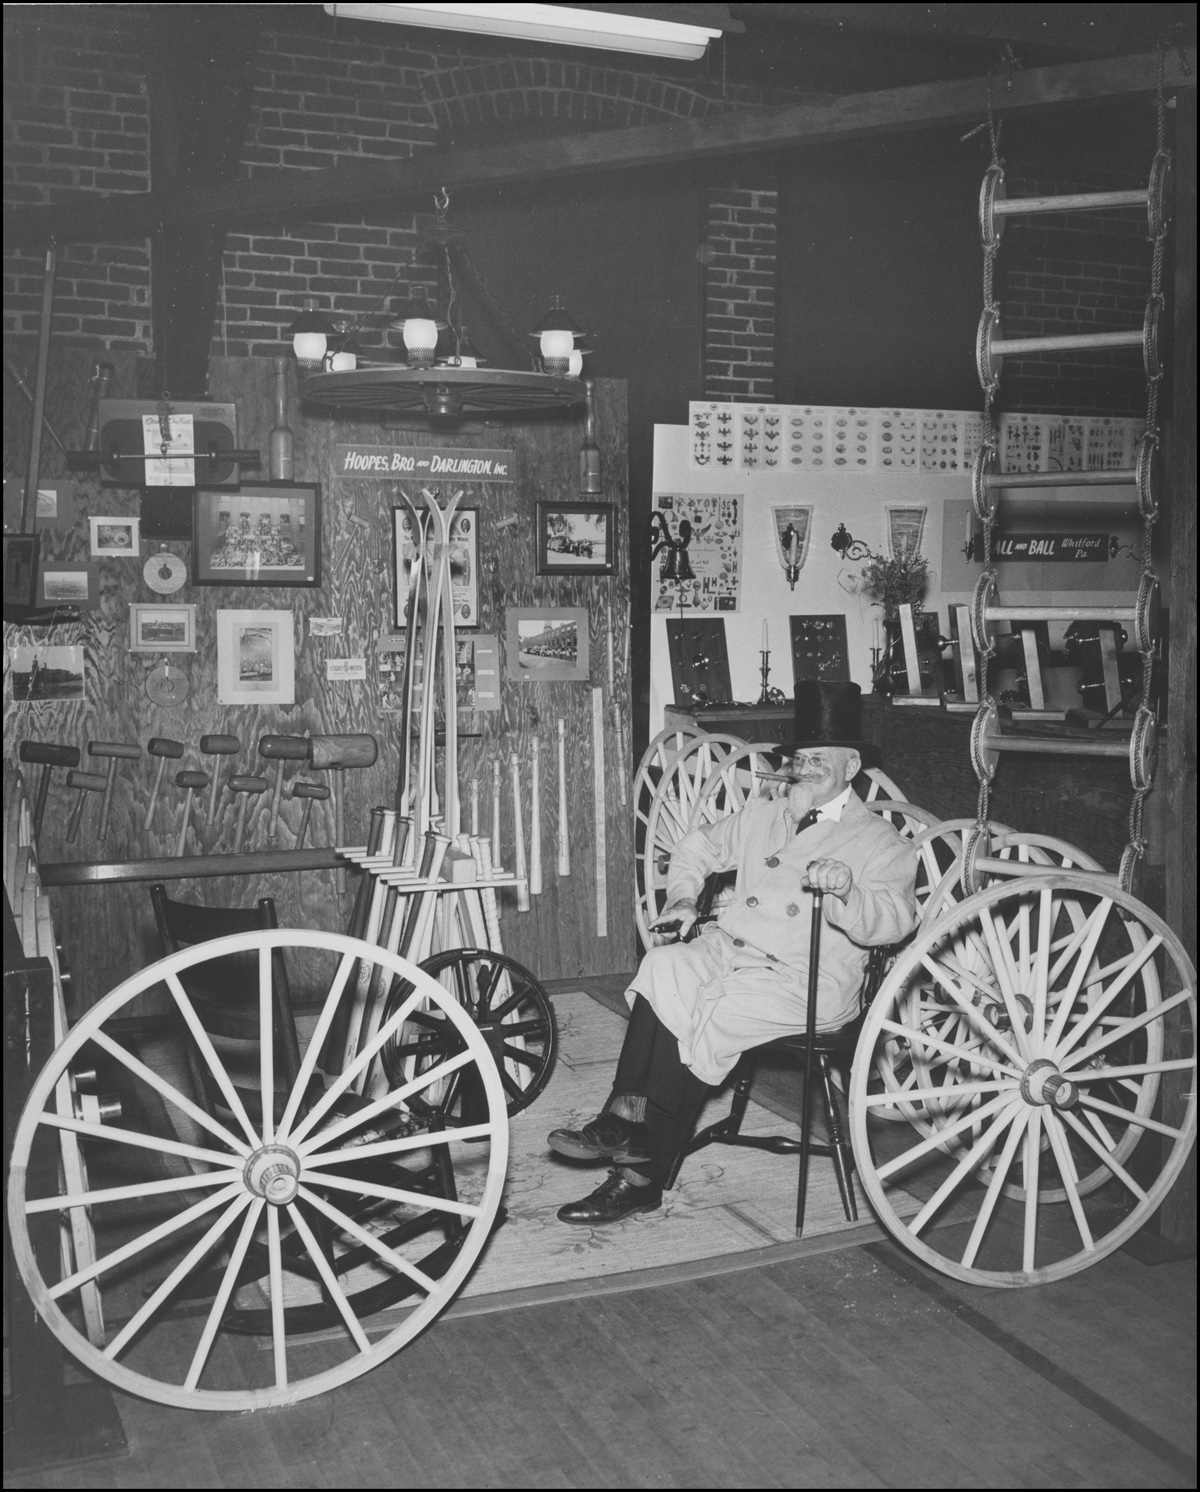 Black and white image of a man in a coat and top hat, seated in a booth exhibiting the works of the Hoopes Brothers & Darlington company. 